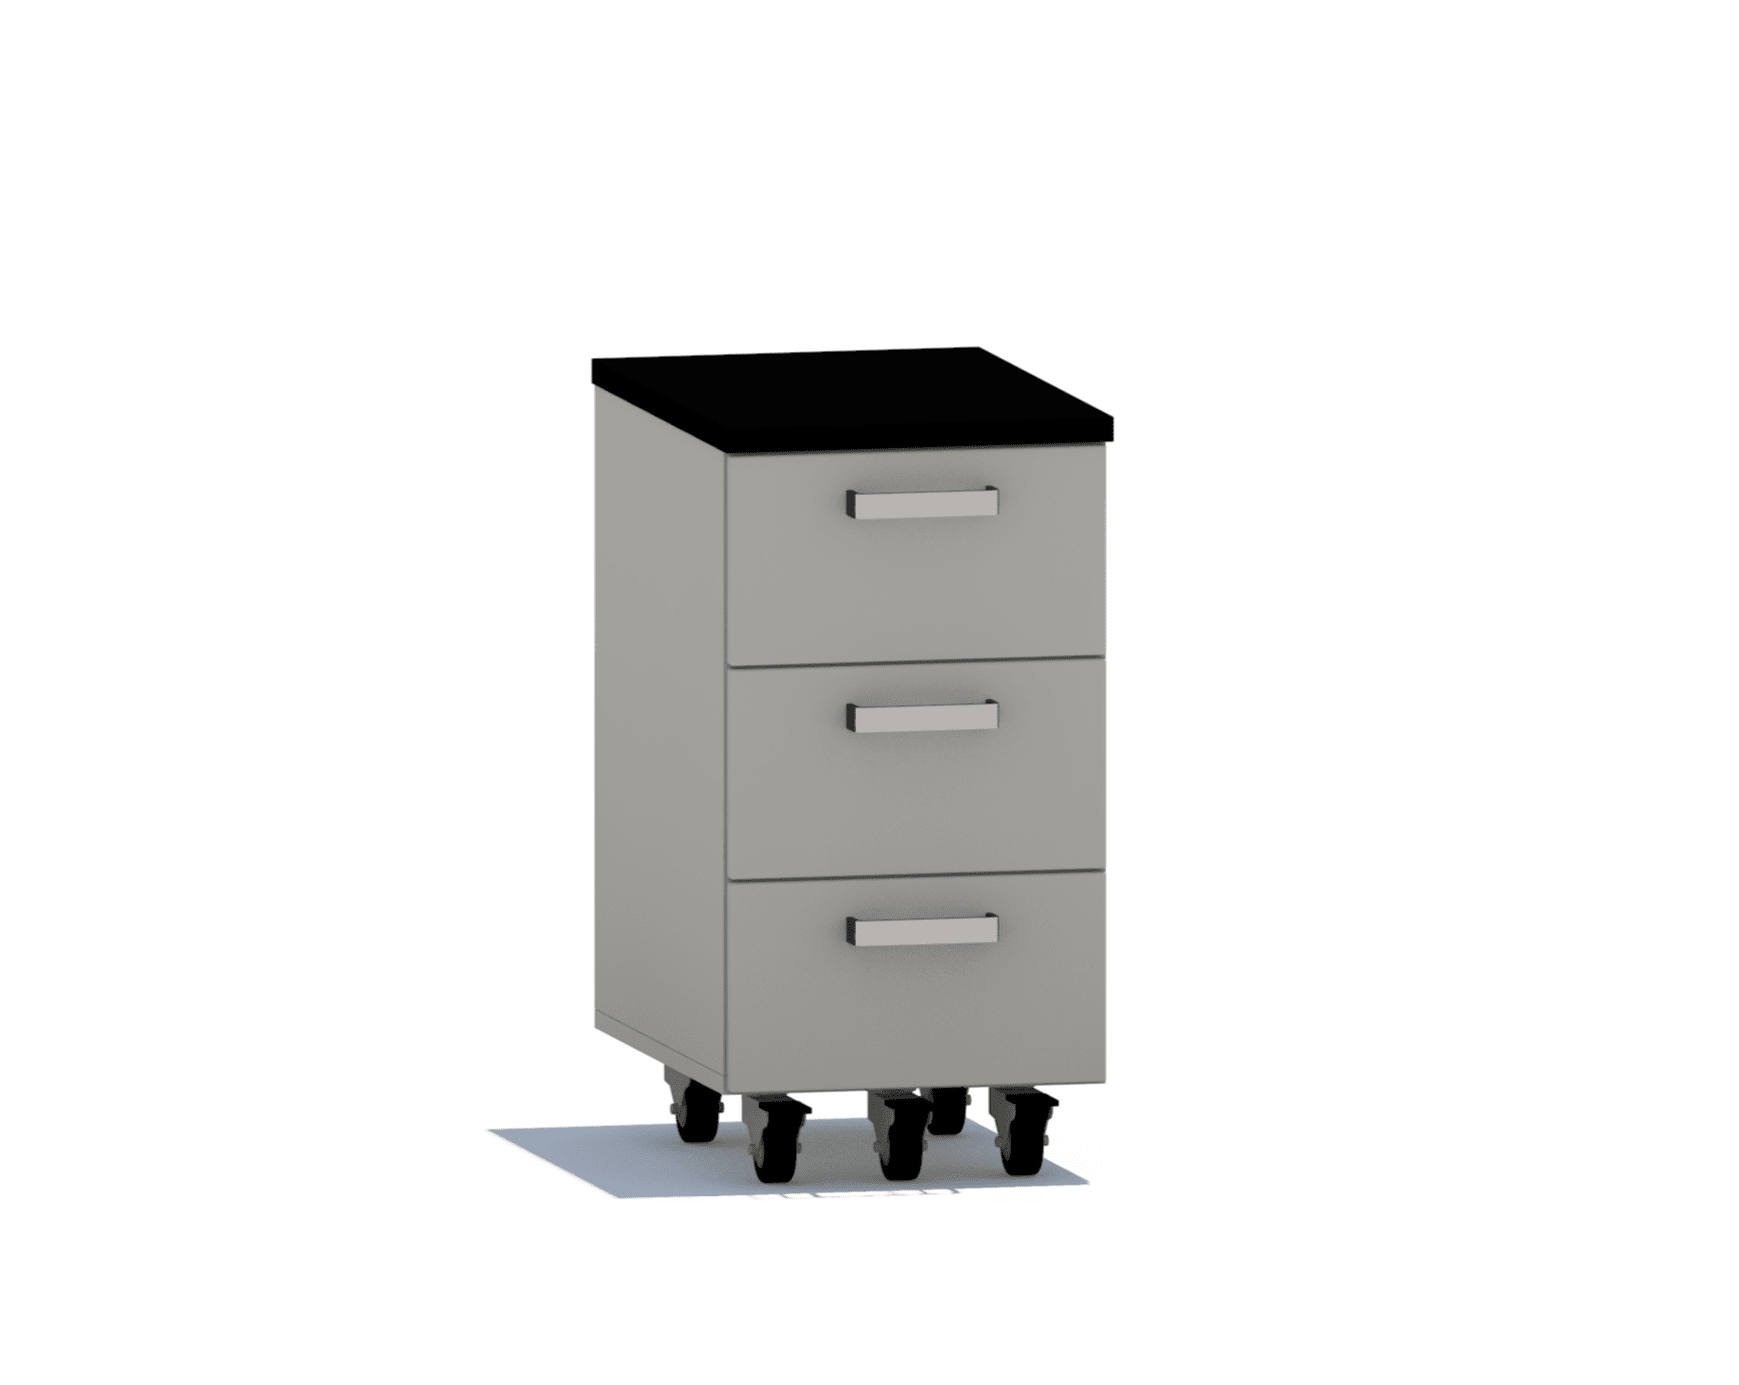 Drawer Storage Unit Workstations omnilabsolutions 16 wide Yes 